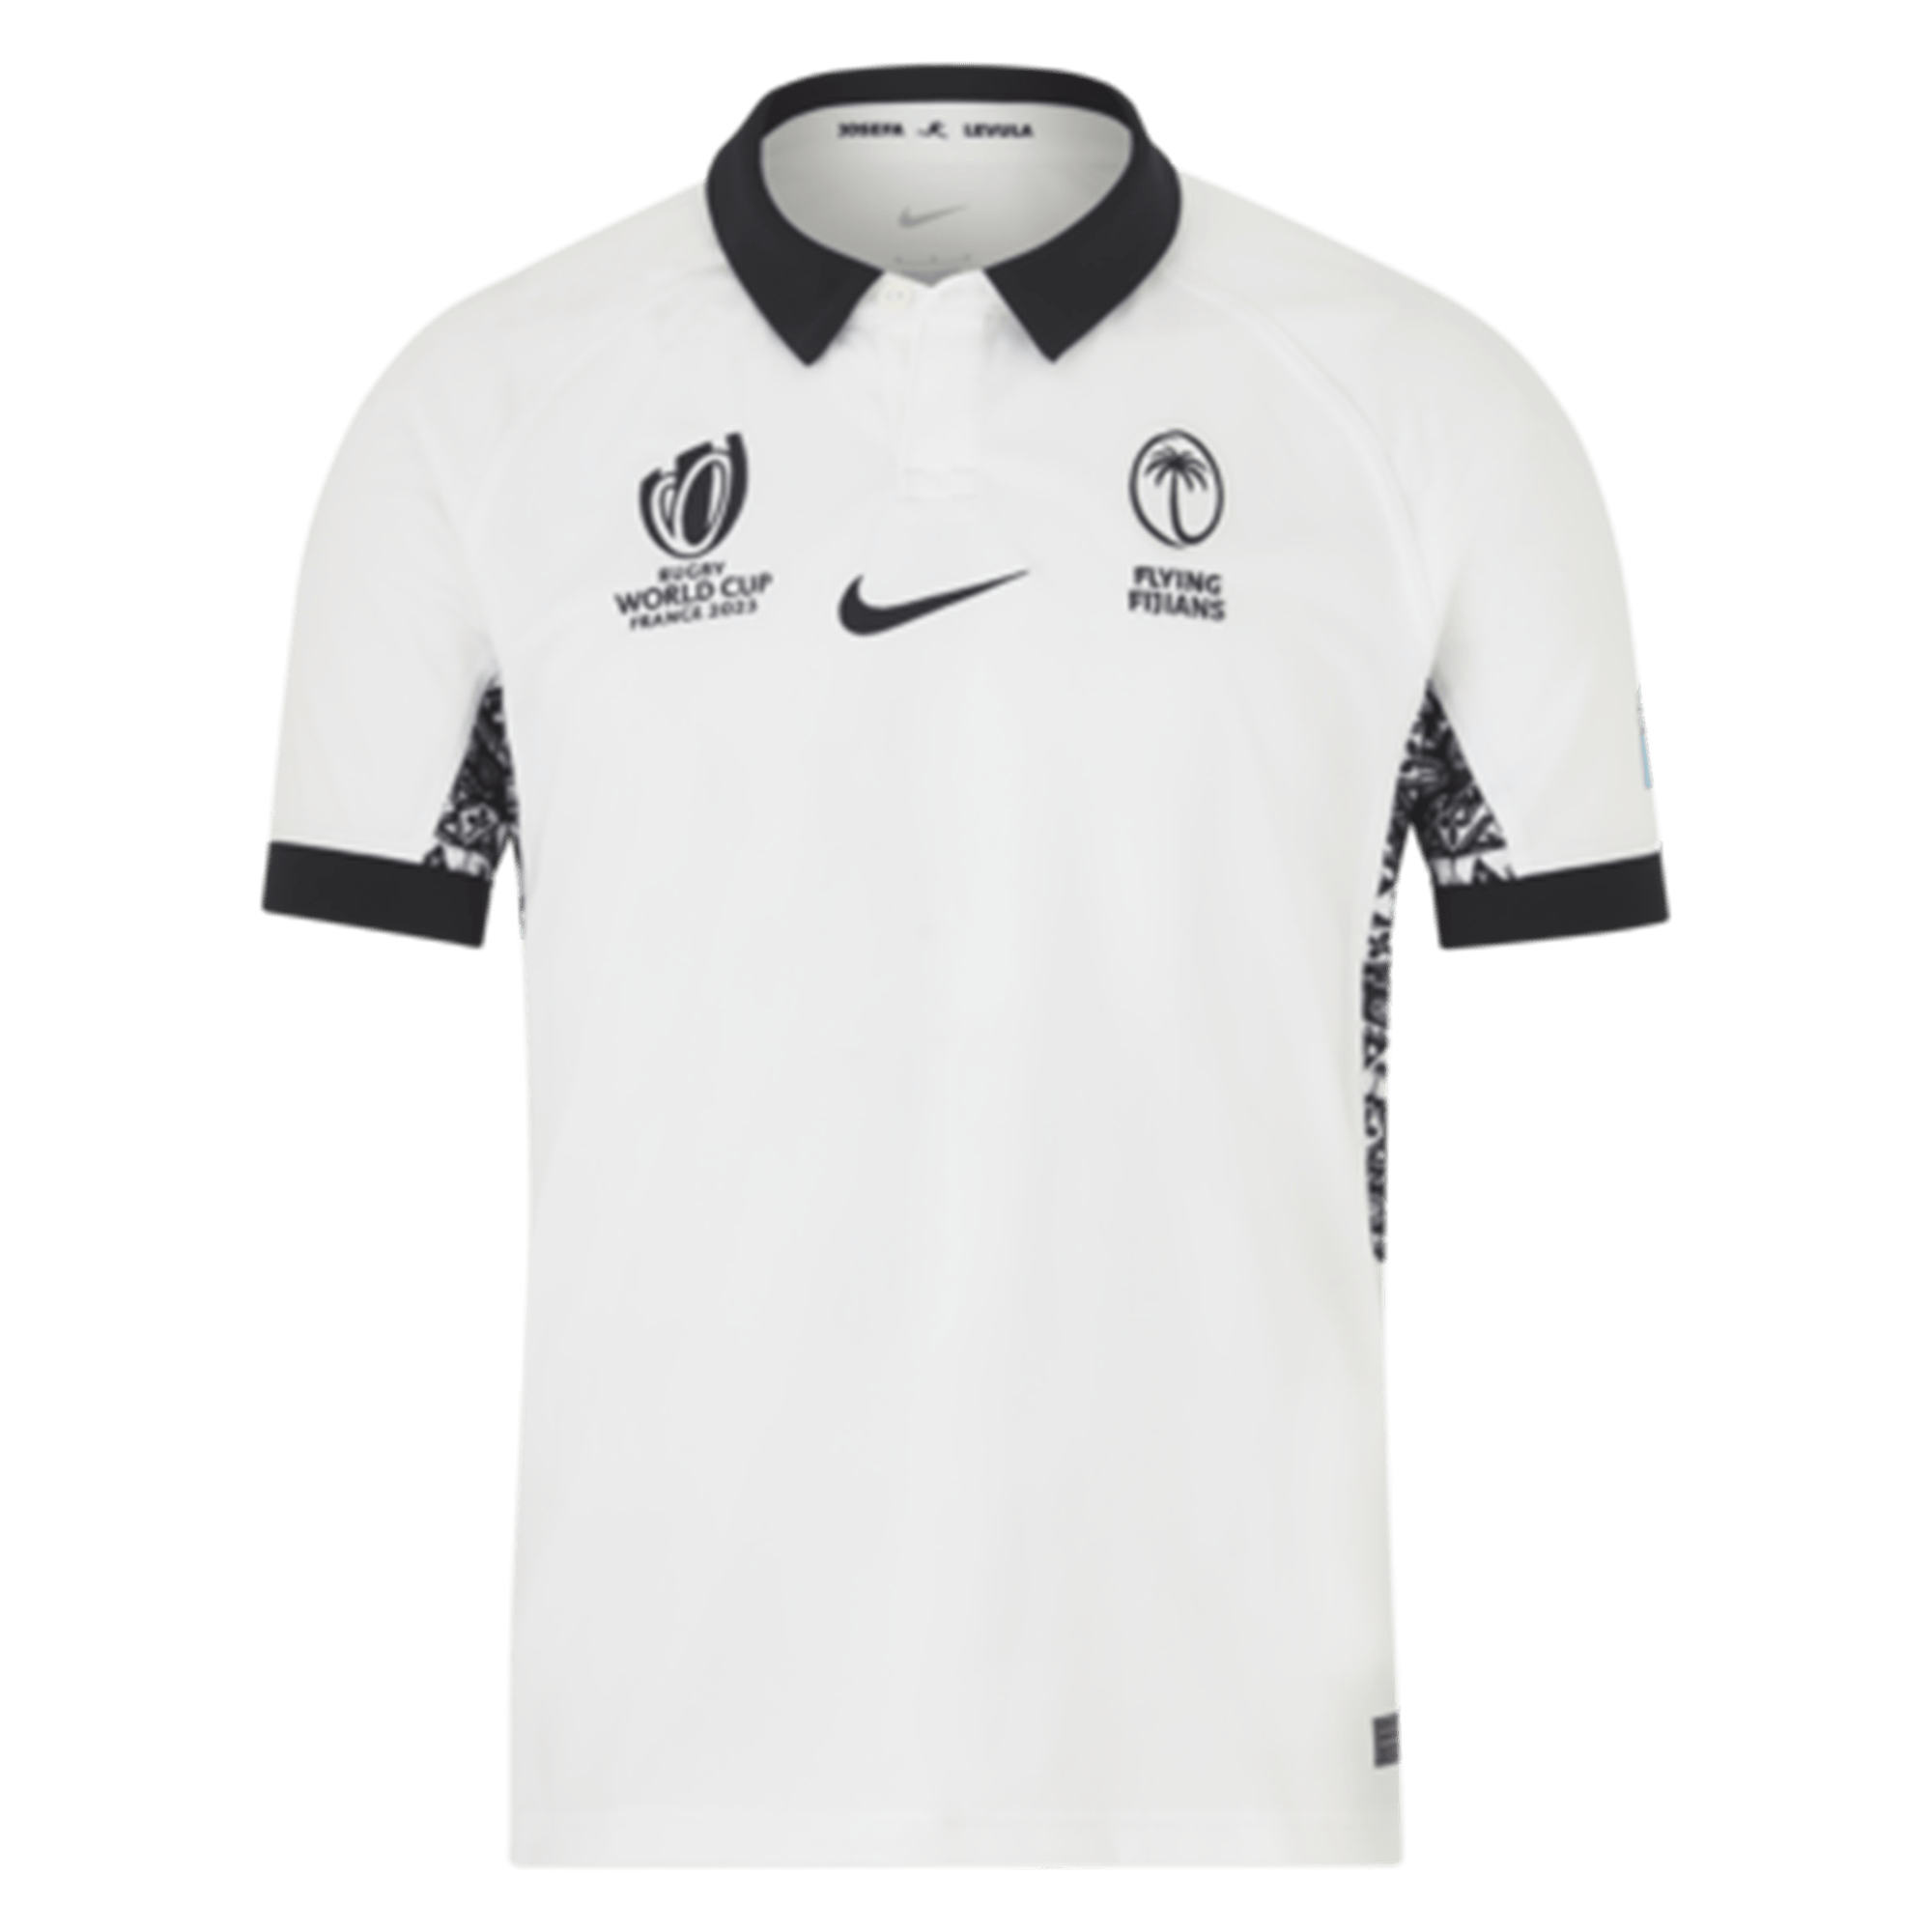  Men's Rugby Jersey, South Africa World Cup, Summer